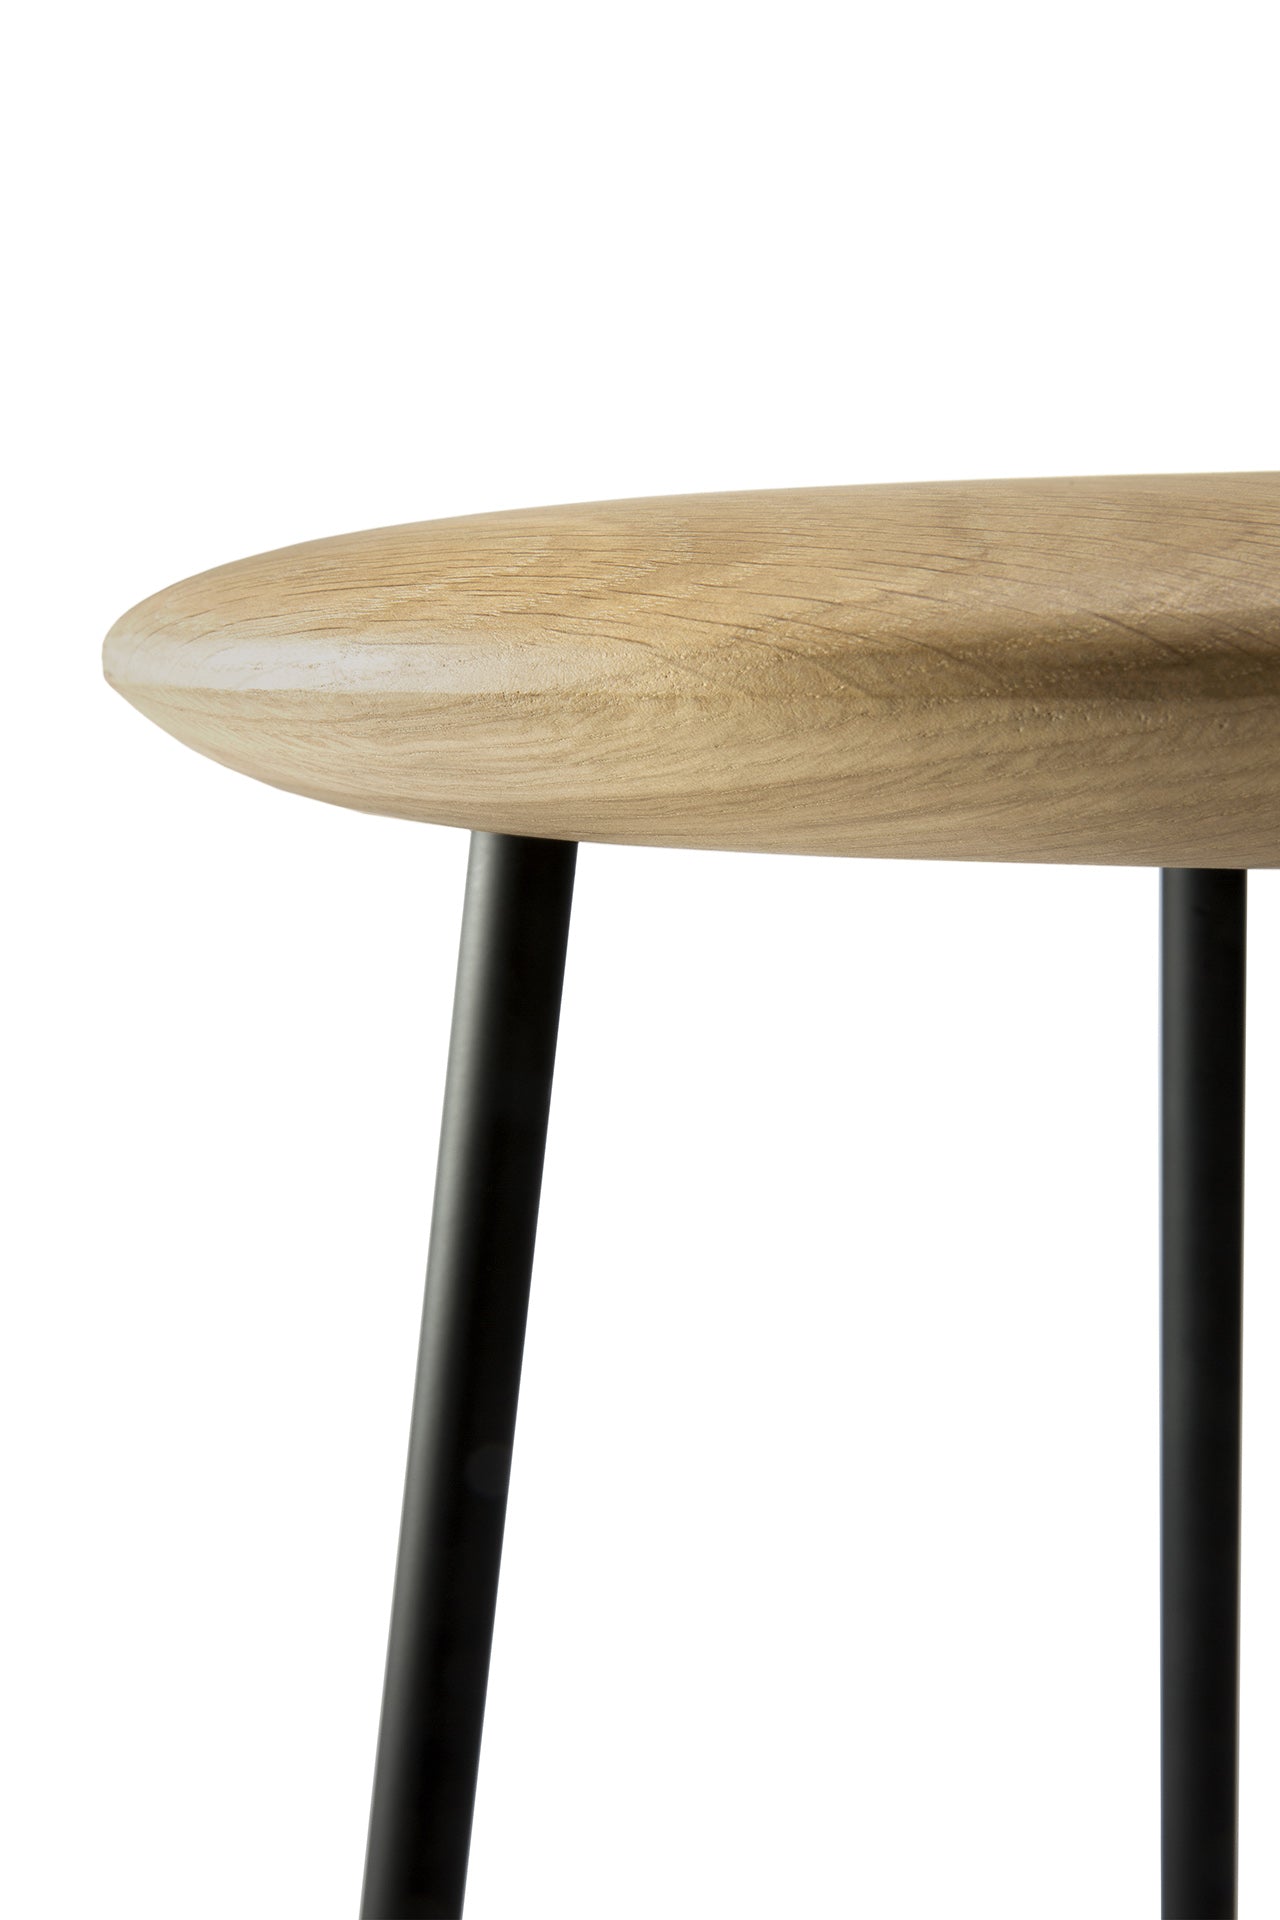 Ethnicraft Oak Baretto Bar Stool is available from Make Your House A Home, Bendigo, Victoria, Australia